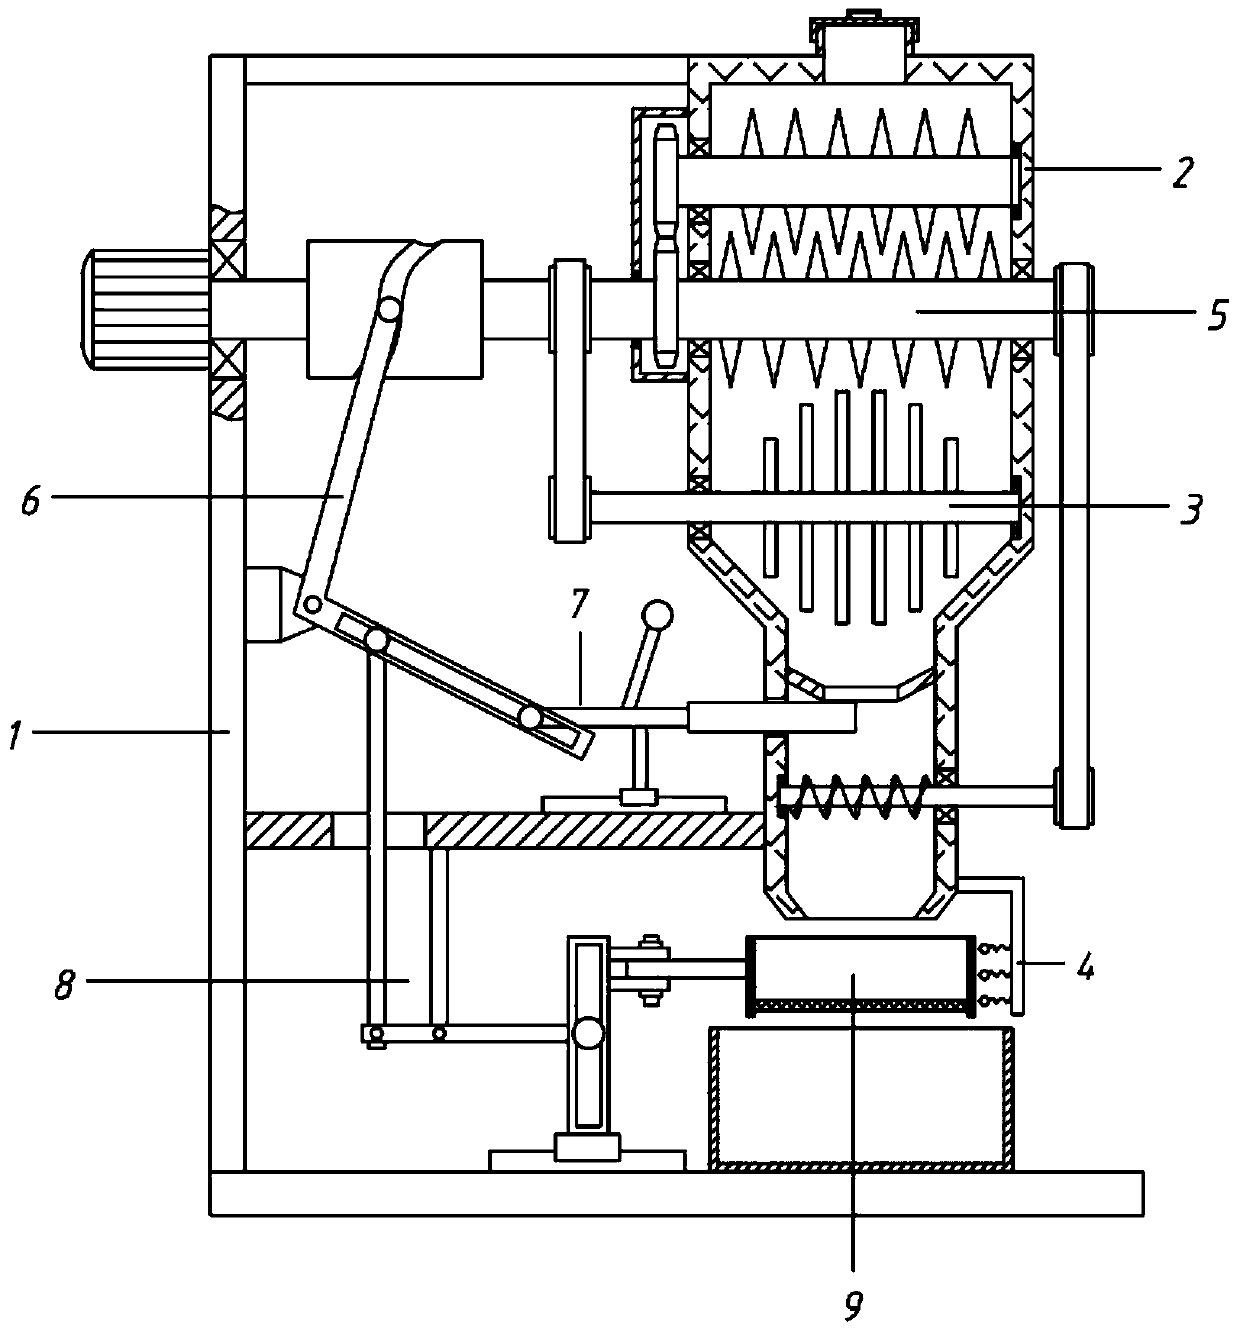 Shaking type feed screening machine based on cylindrical cam driving